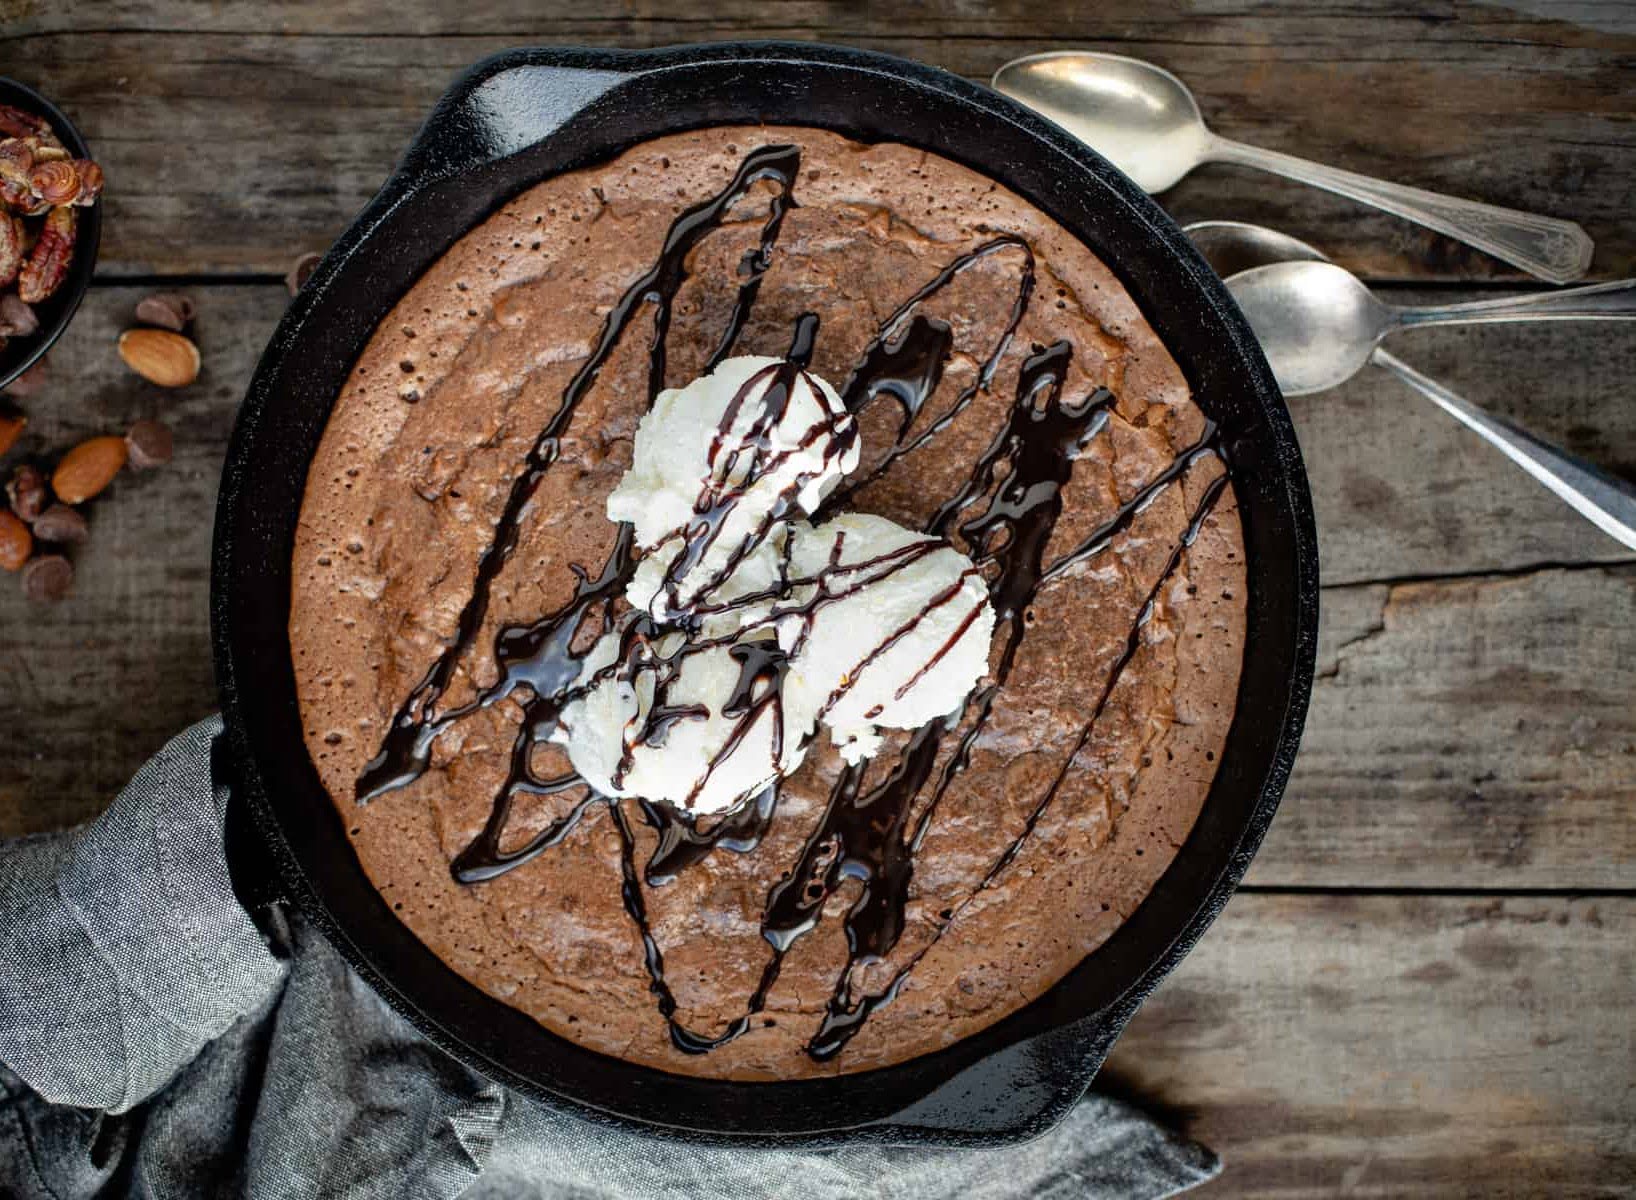 How To Bake Brownies in An Electric Skillet